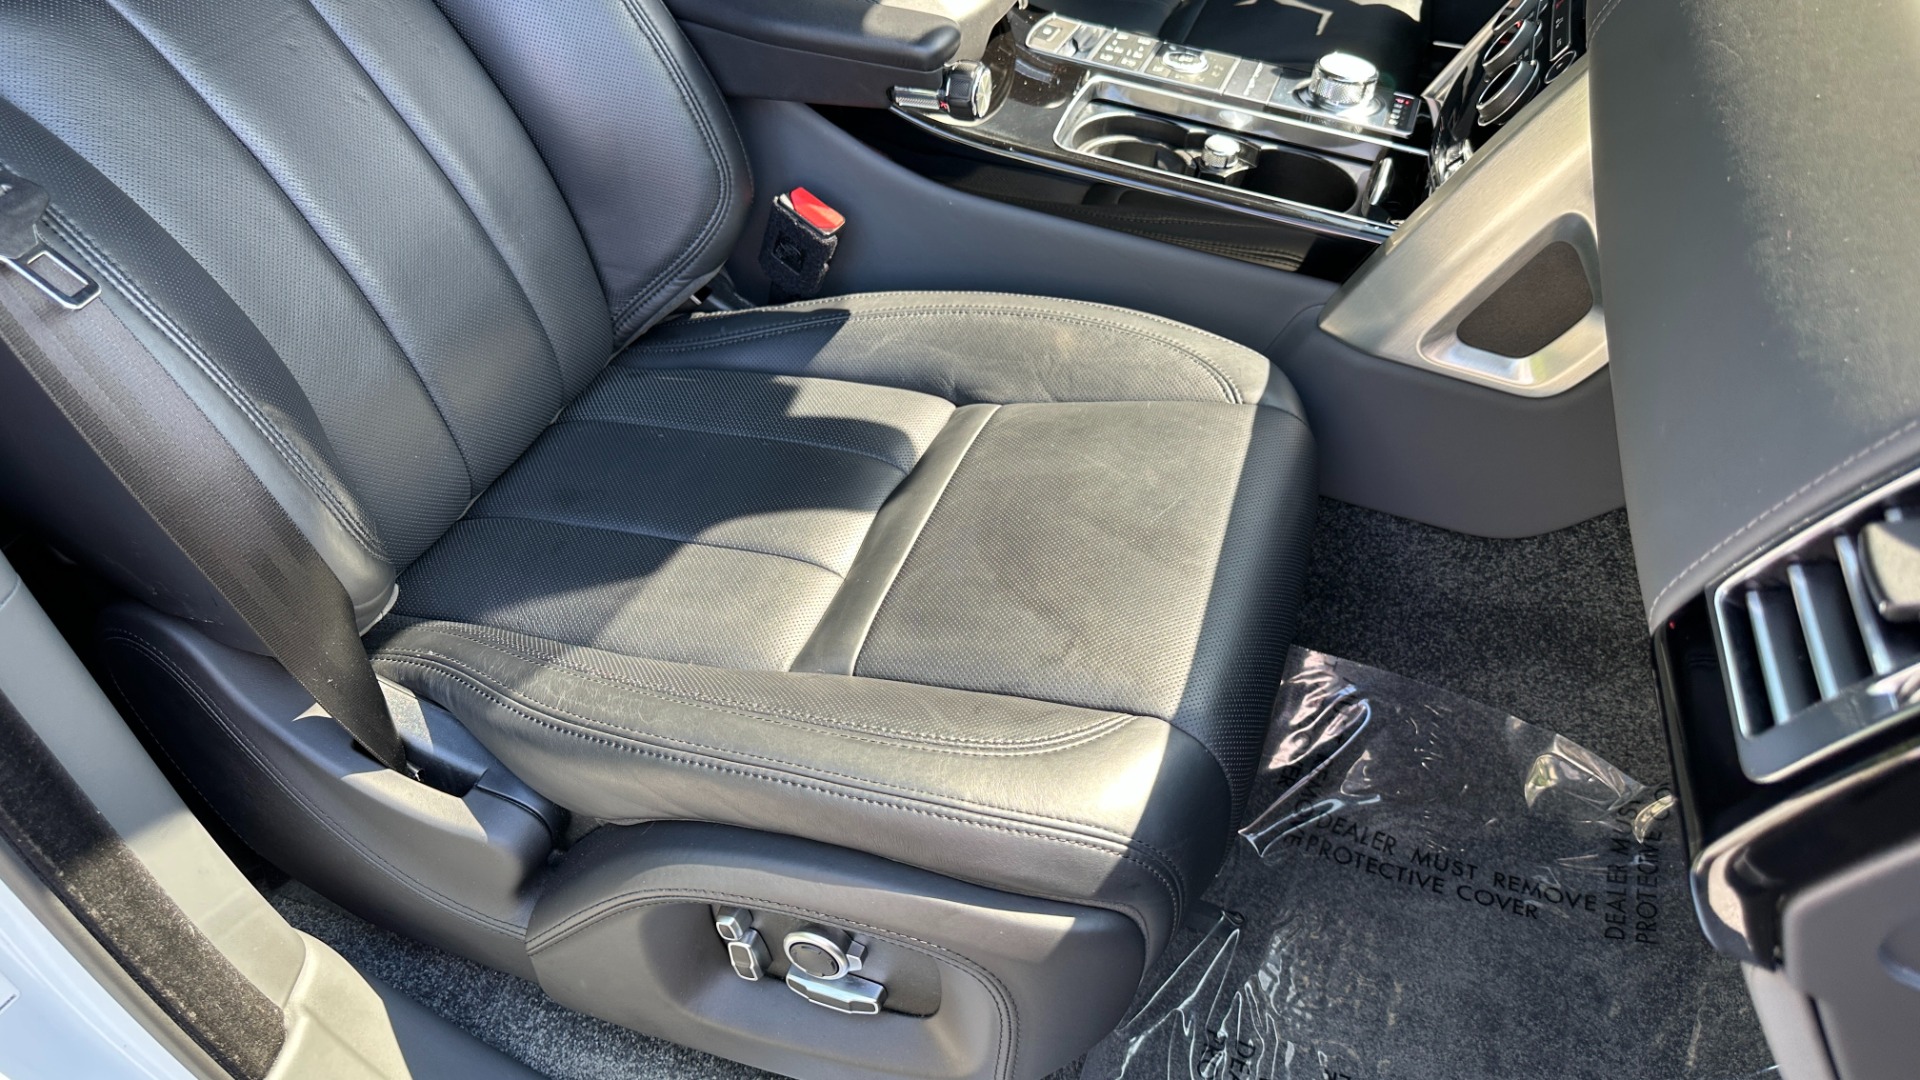 Used 2017 Land Rover Range Rover SV AUTOBIOGRAPHY / LOADED / REAR MASSAGE / EXECUTIVE SEATING / LWB for sale $75,900 at Formula Imports in Charlotte NC 28227 46